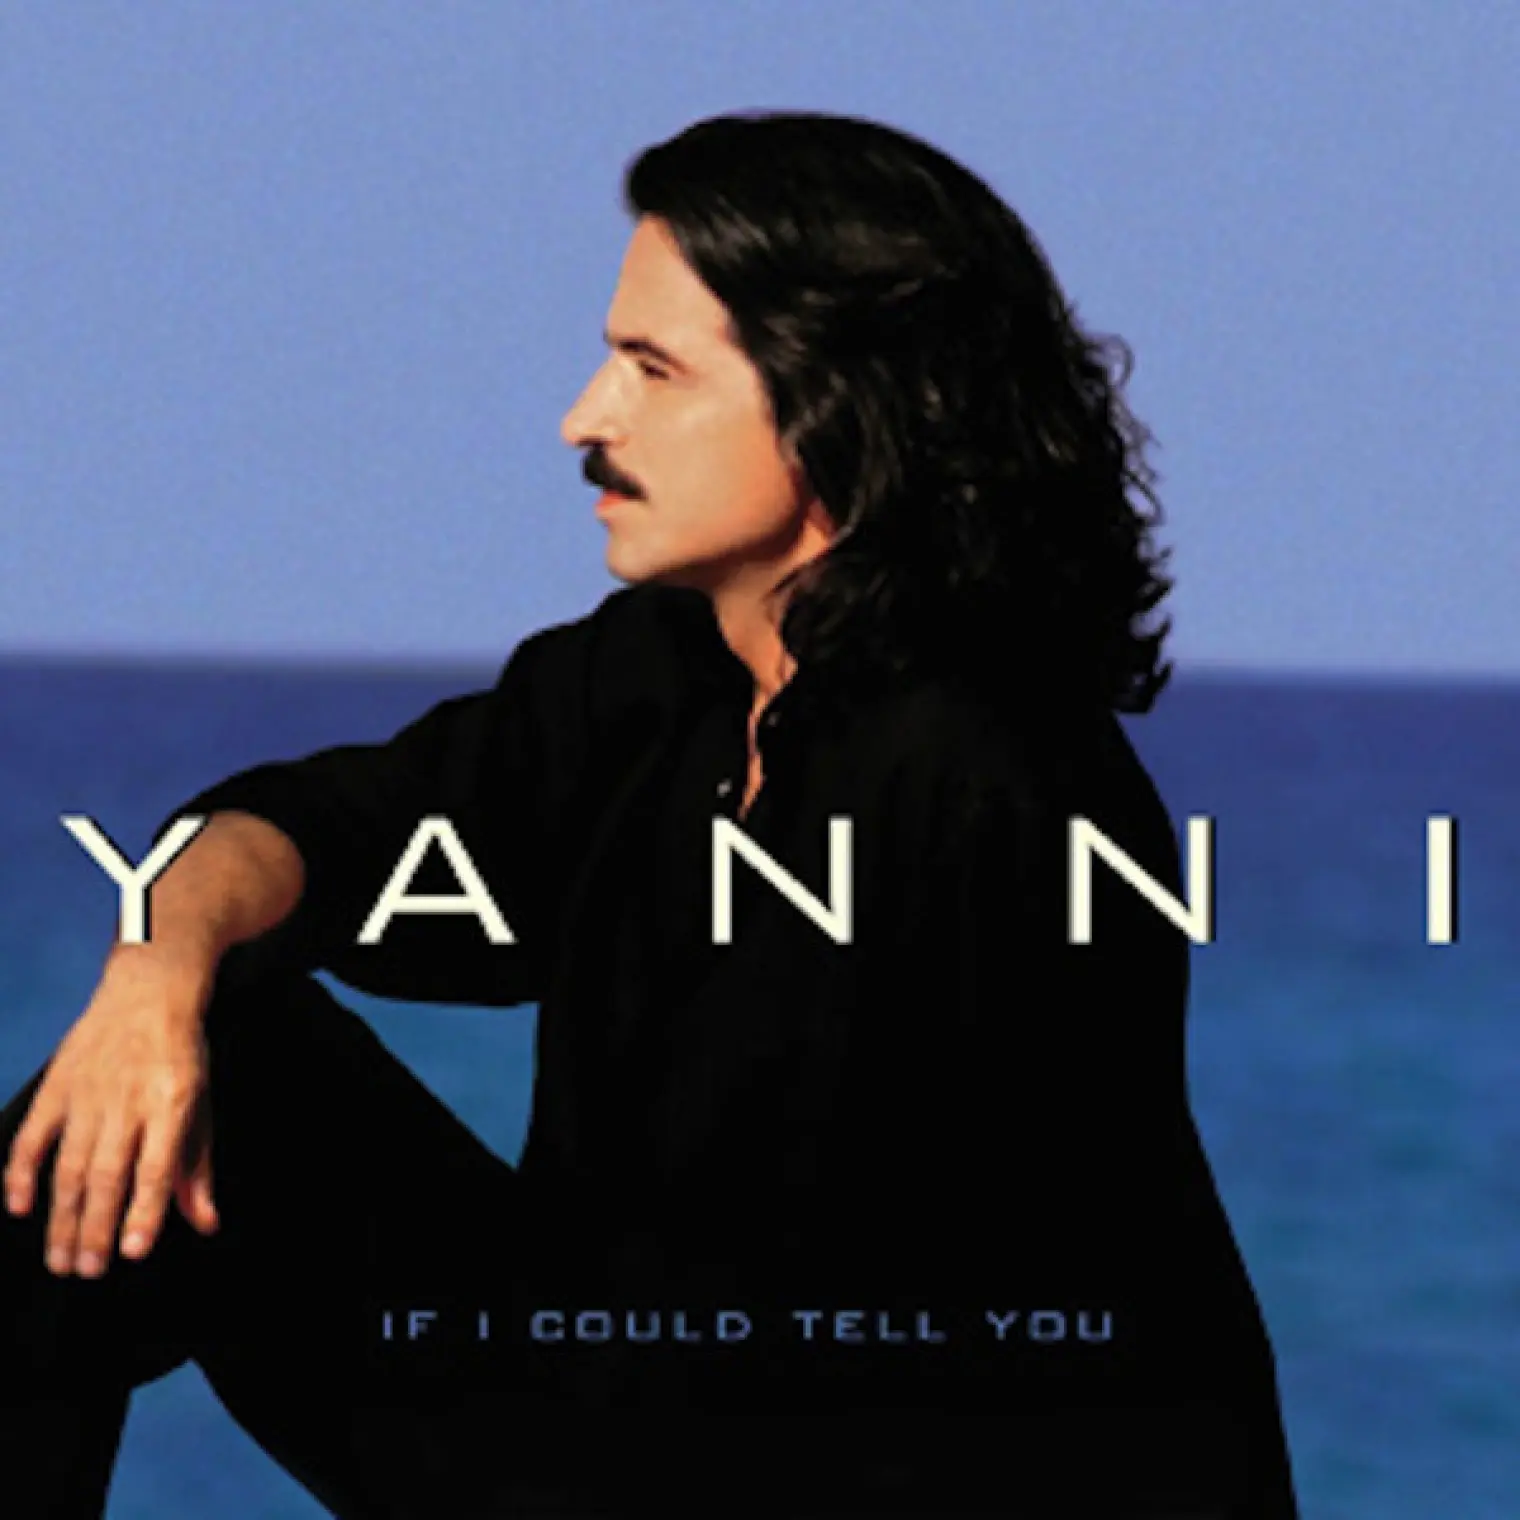 If I Could Tell You -  Yanni 